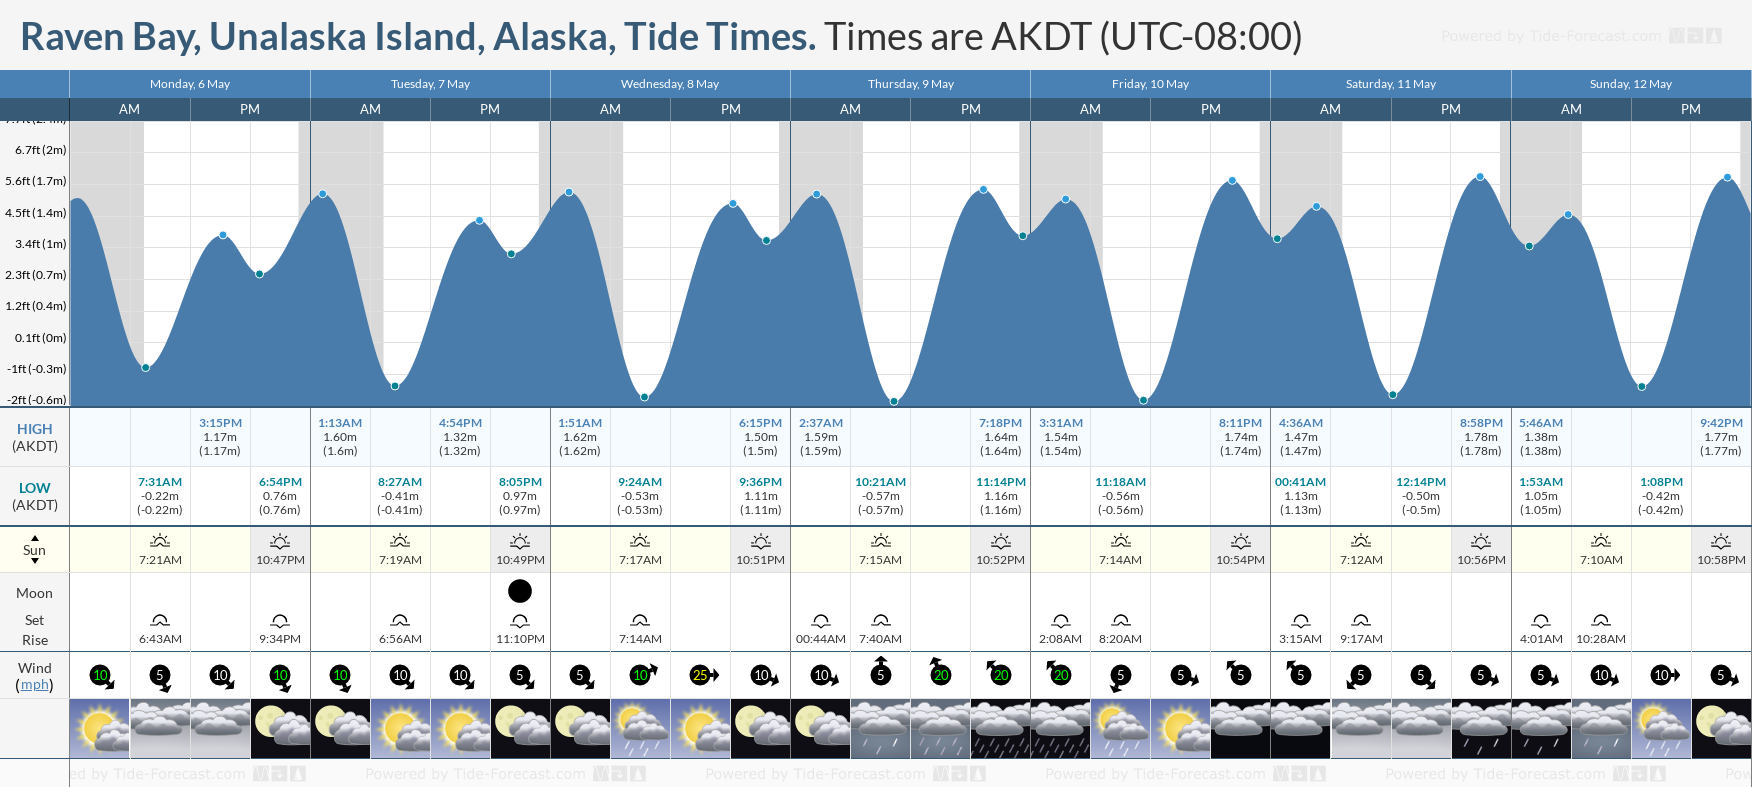 Raven Bay, Unalaska Island, Alaska Tide Chart including high and low tide tide times for the next 7 days